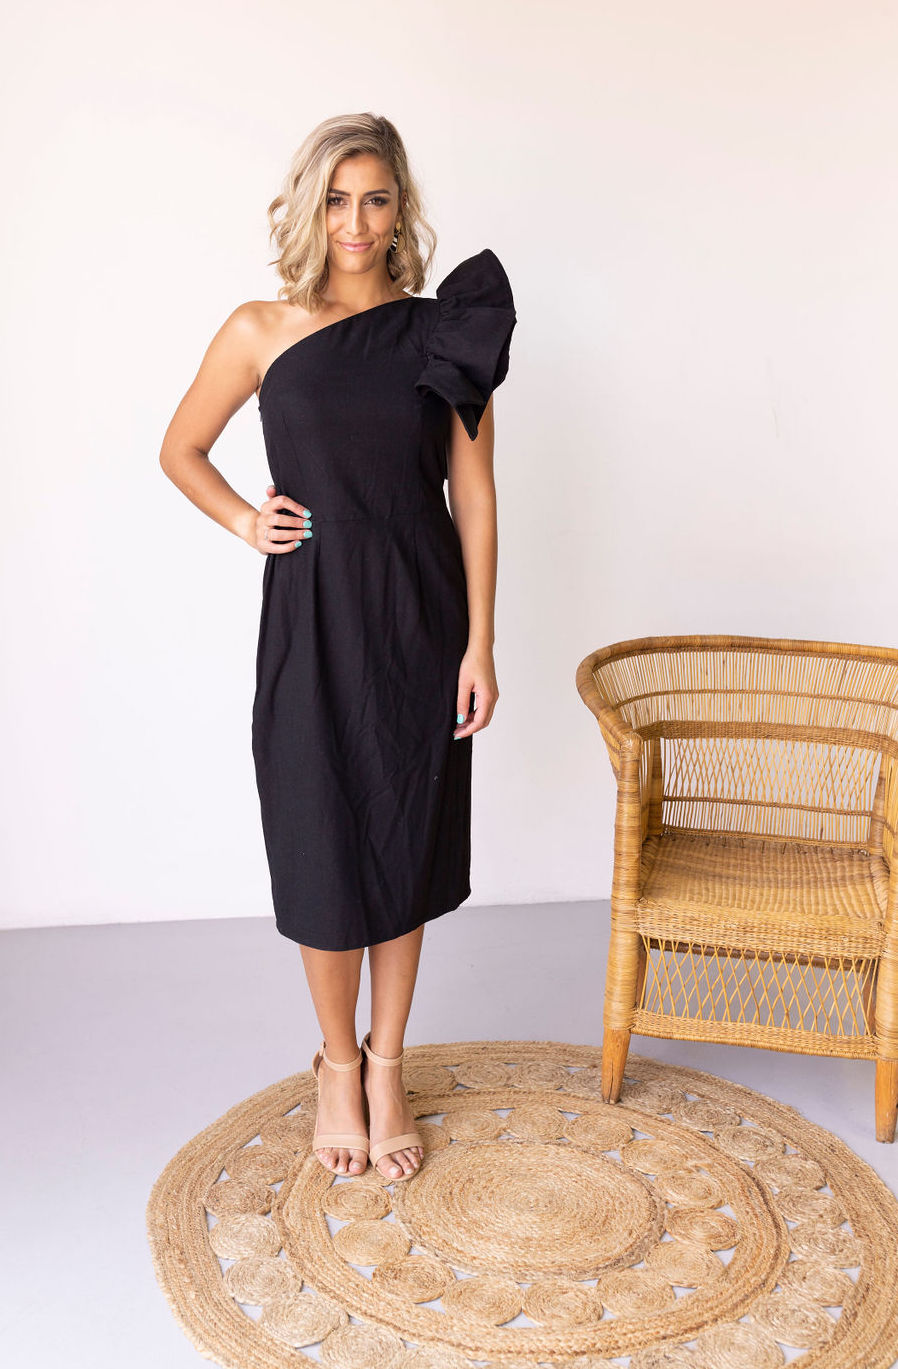 Woman wearing the Mari Dress sewing pattern from Pattern Sewciety on The Fold Line. A dress pattern made in cotton, linen or rayon fabrics, featuring a sheath style silhouette, front and back waist darts, asymmetric neckline with shoulder ruffle and below